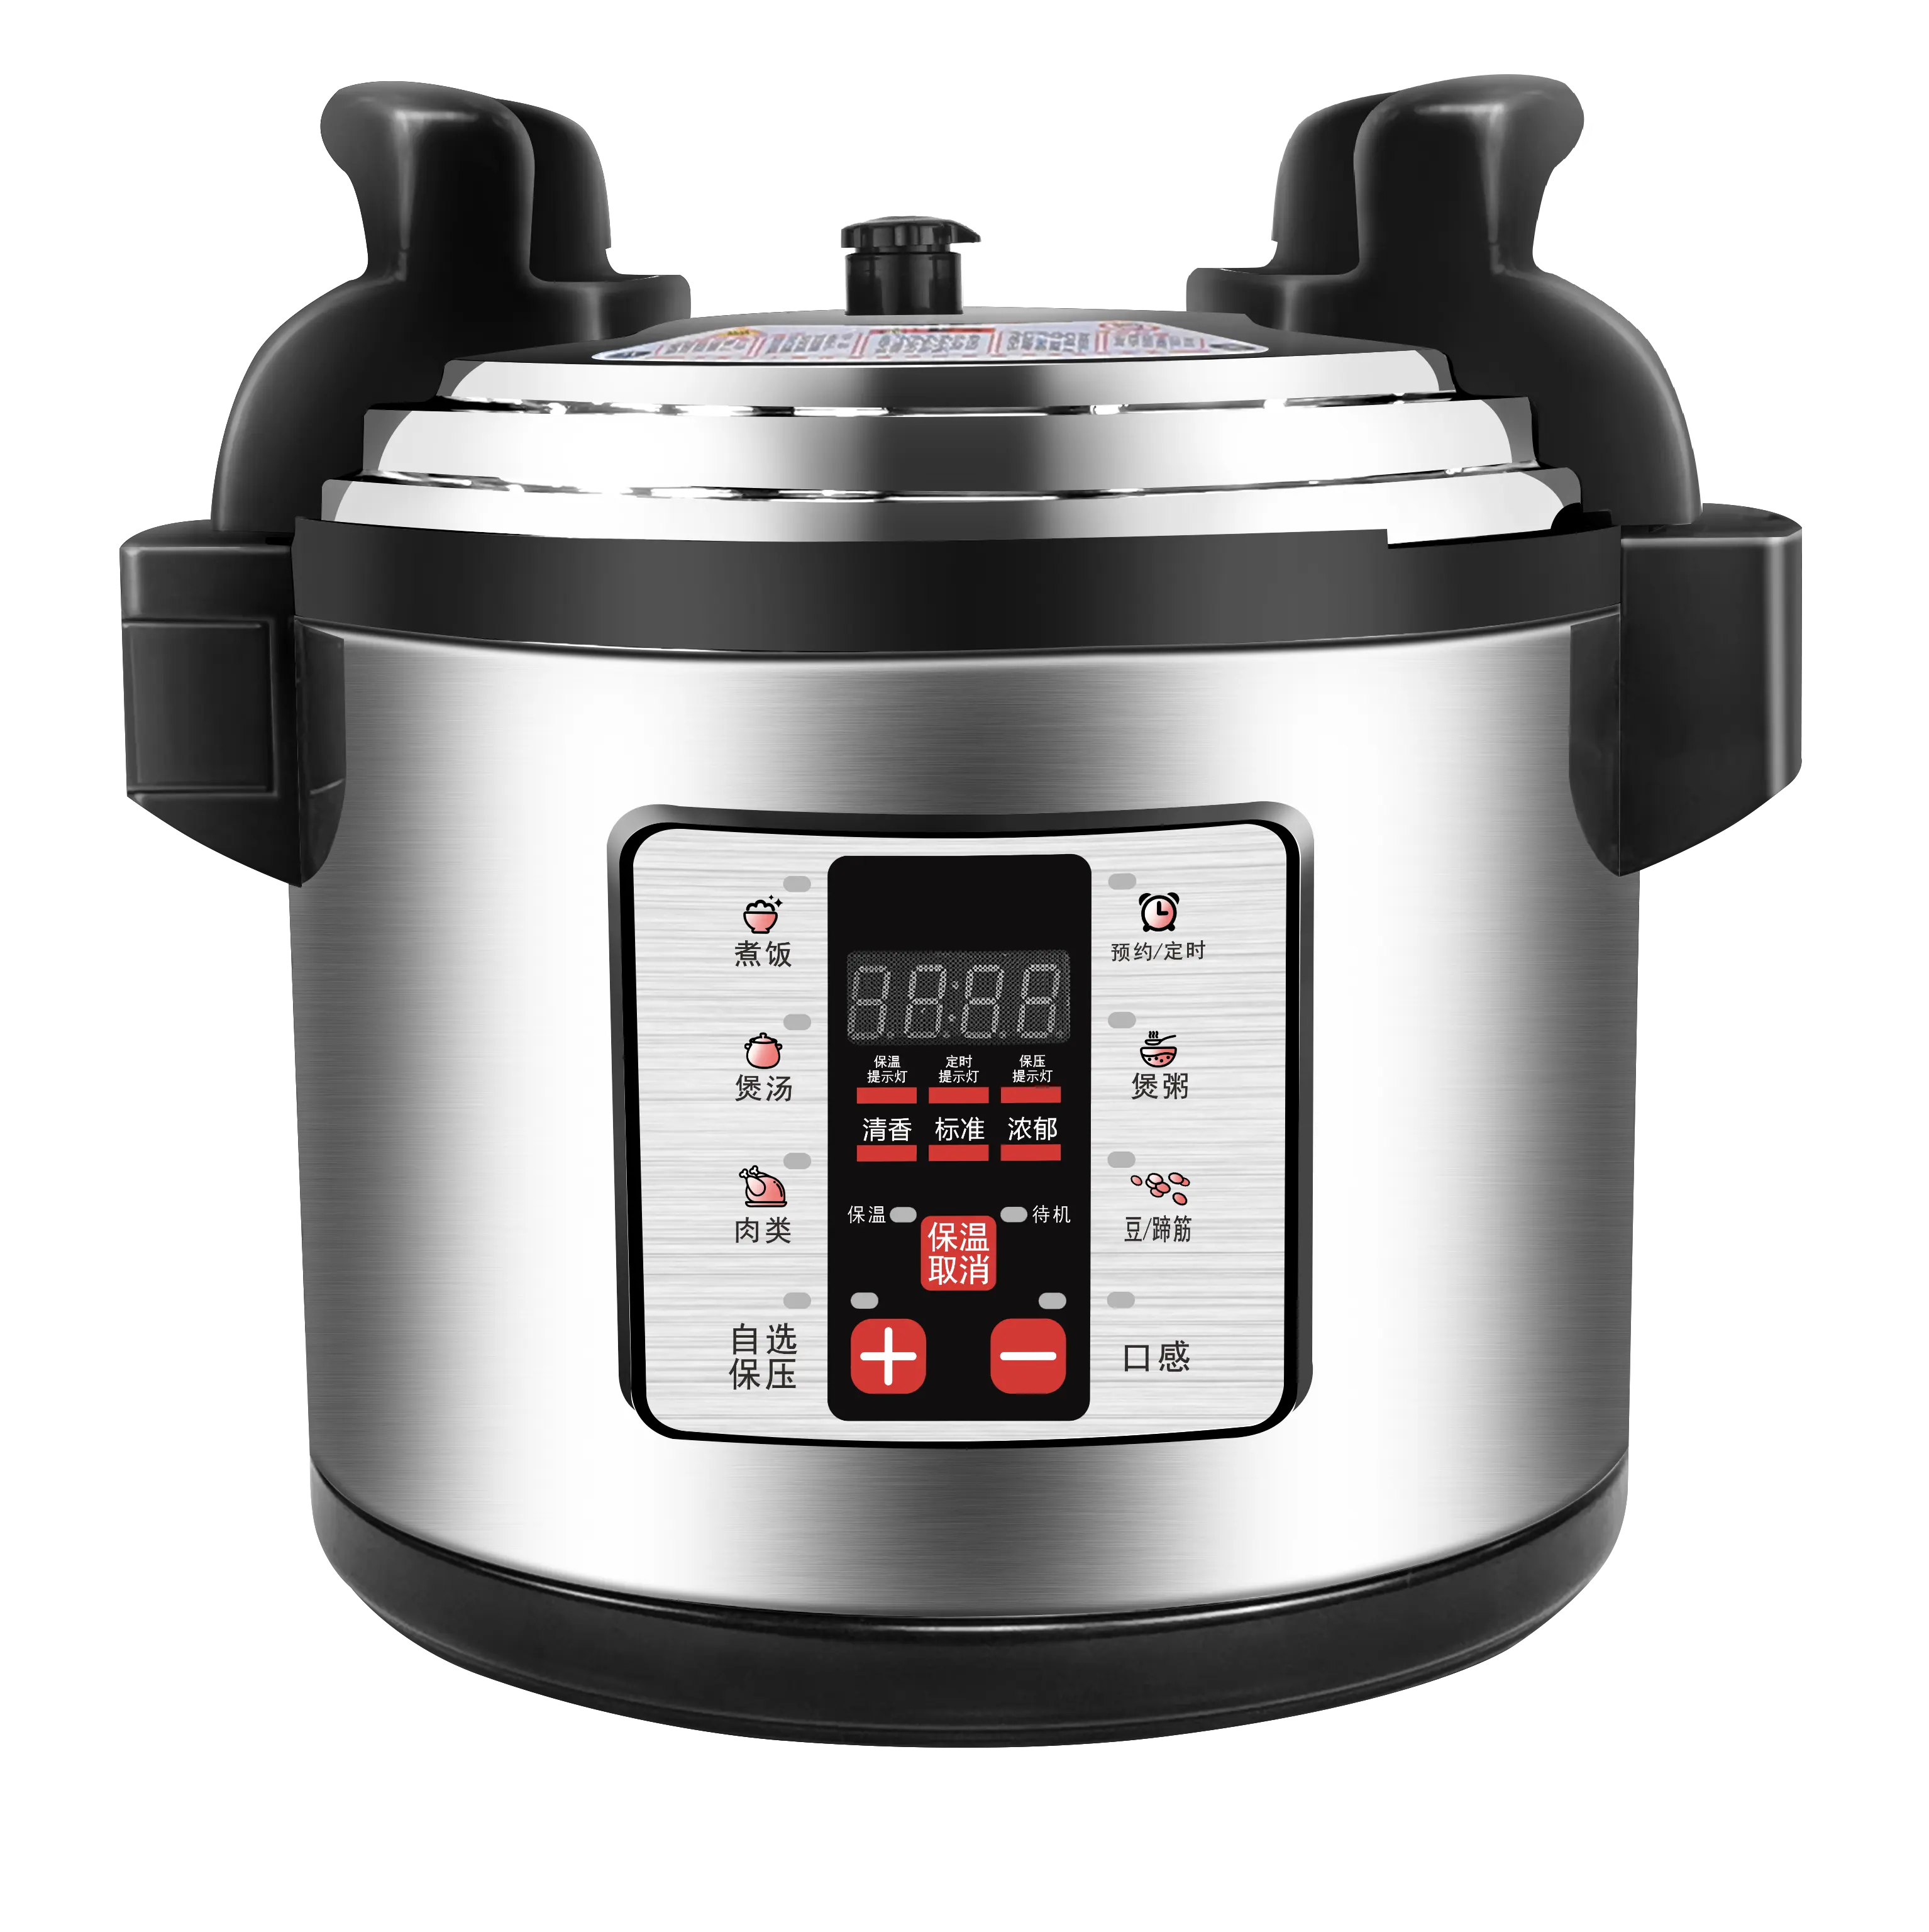 Okicook 18L Large Capacity Commercial Multi function Automatic Cook Rice Beef Electrical Pressure cooker for Hotel